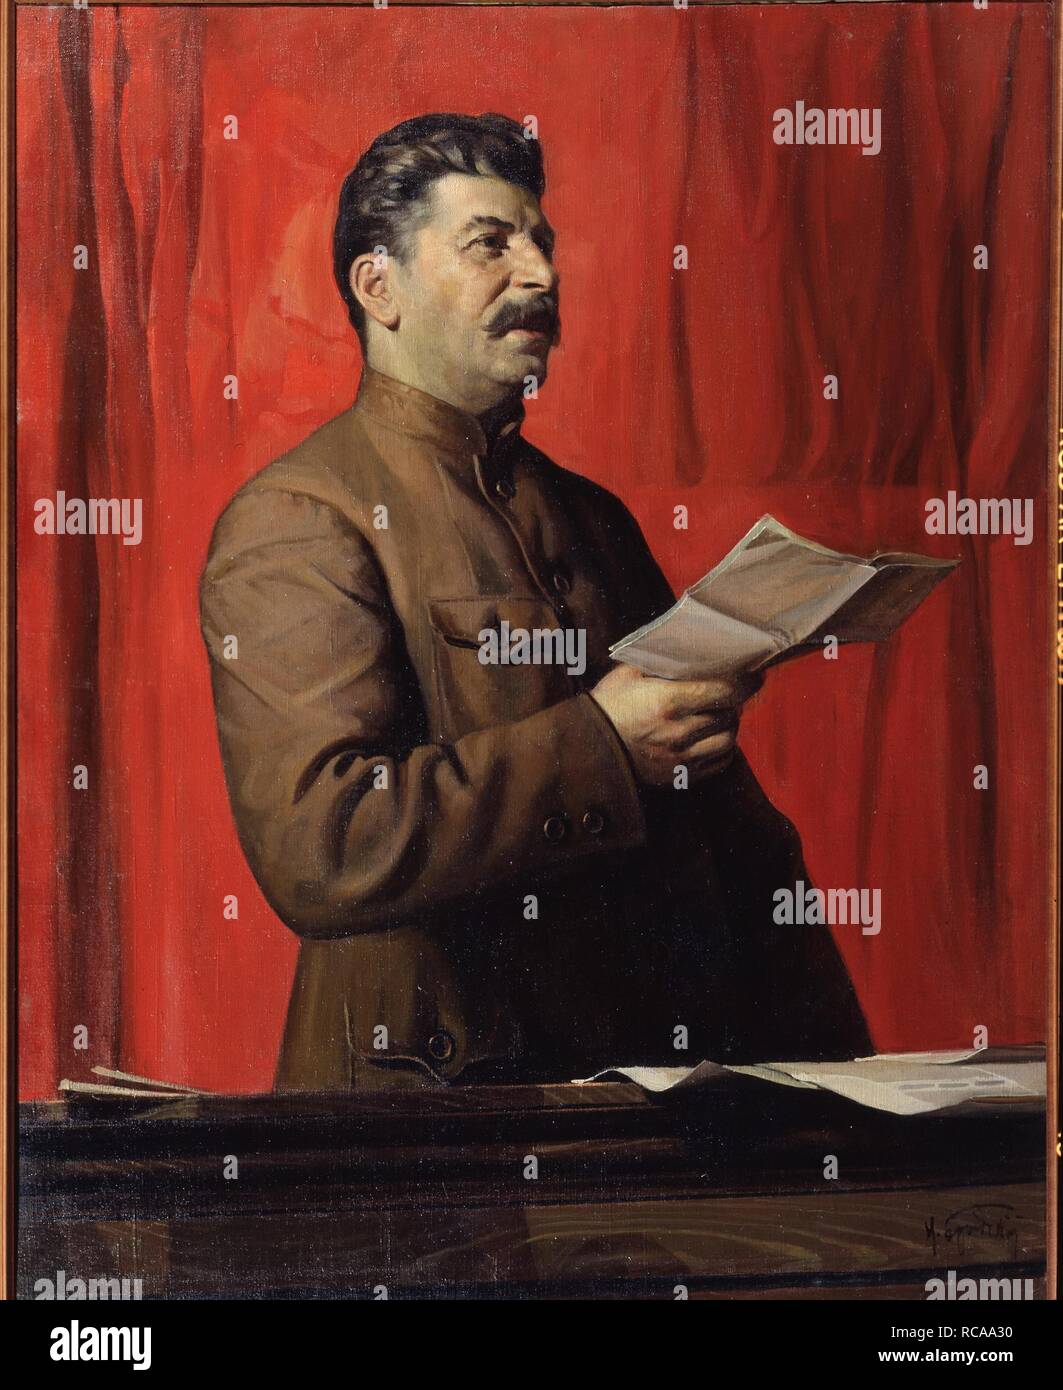 Portrait of Joseph Stalin (1879-1953). Museum: State Museum-and exhibition Centre ROSIZO, Moscow. Author: Brodsky, Isaak Izrailevich. Stock Photo